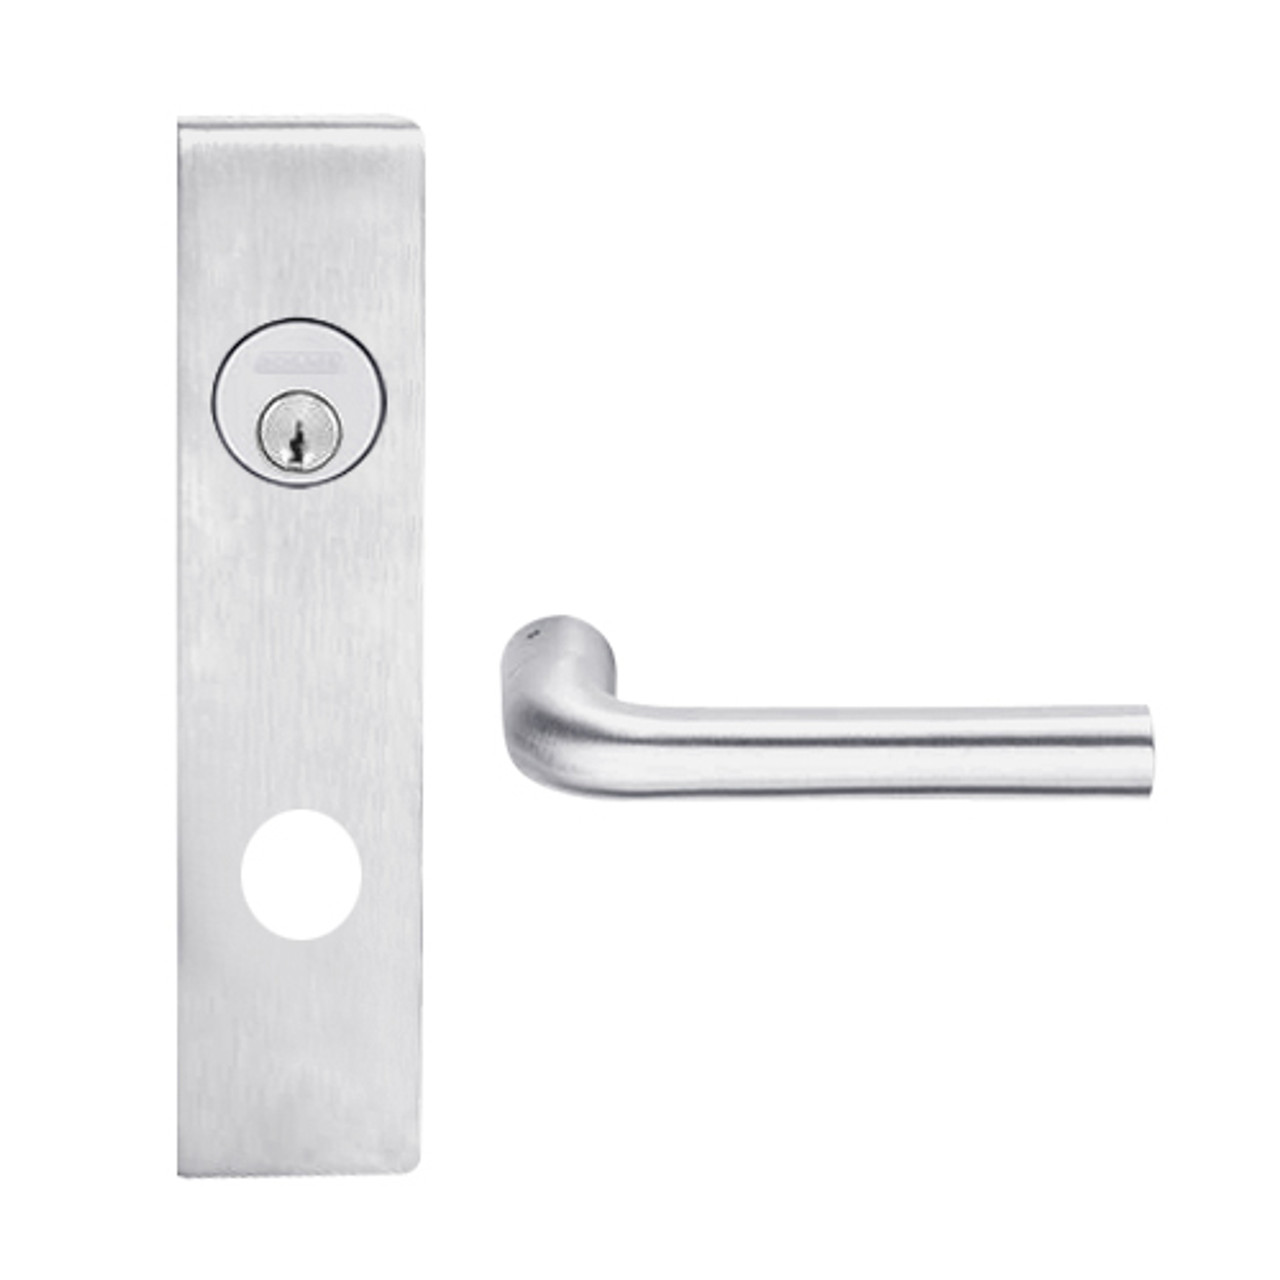 L9026P-02L-626 Schlage L Series Exit Lock with Cylinder Commercial Mortise Lock with 02 Cast Lever Design in Satin Chrome